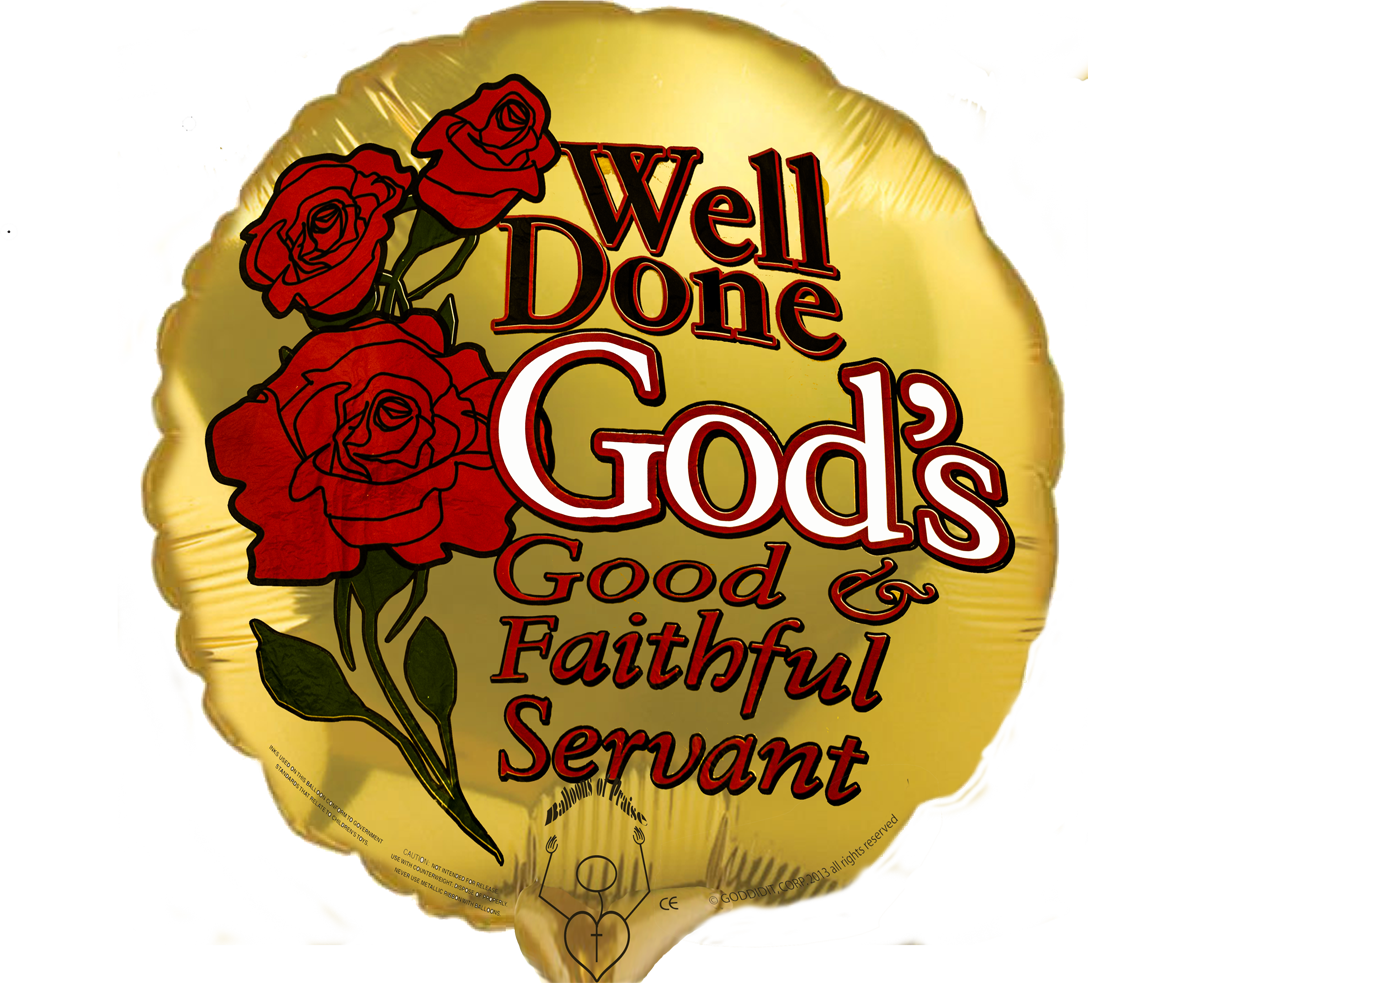 Well Done Gods Good And Faithful Servant   High Praise Gifts